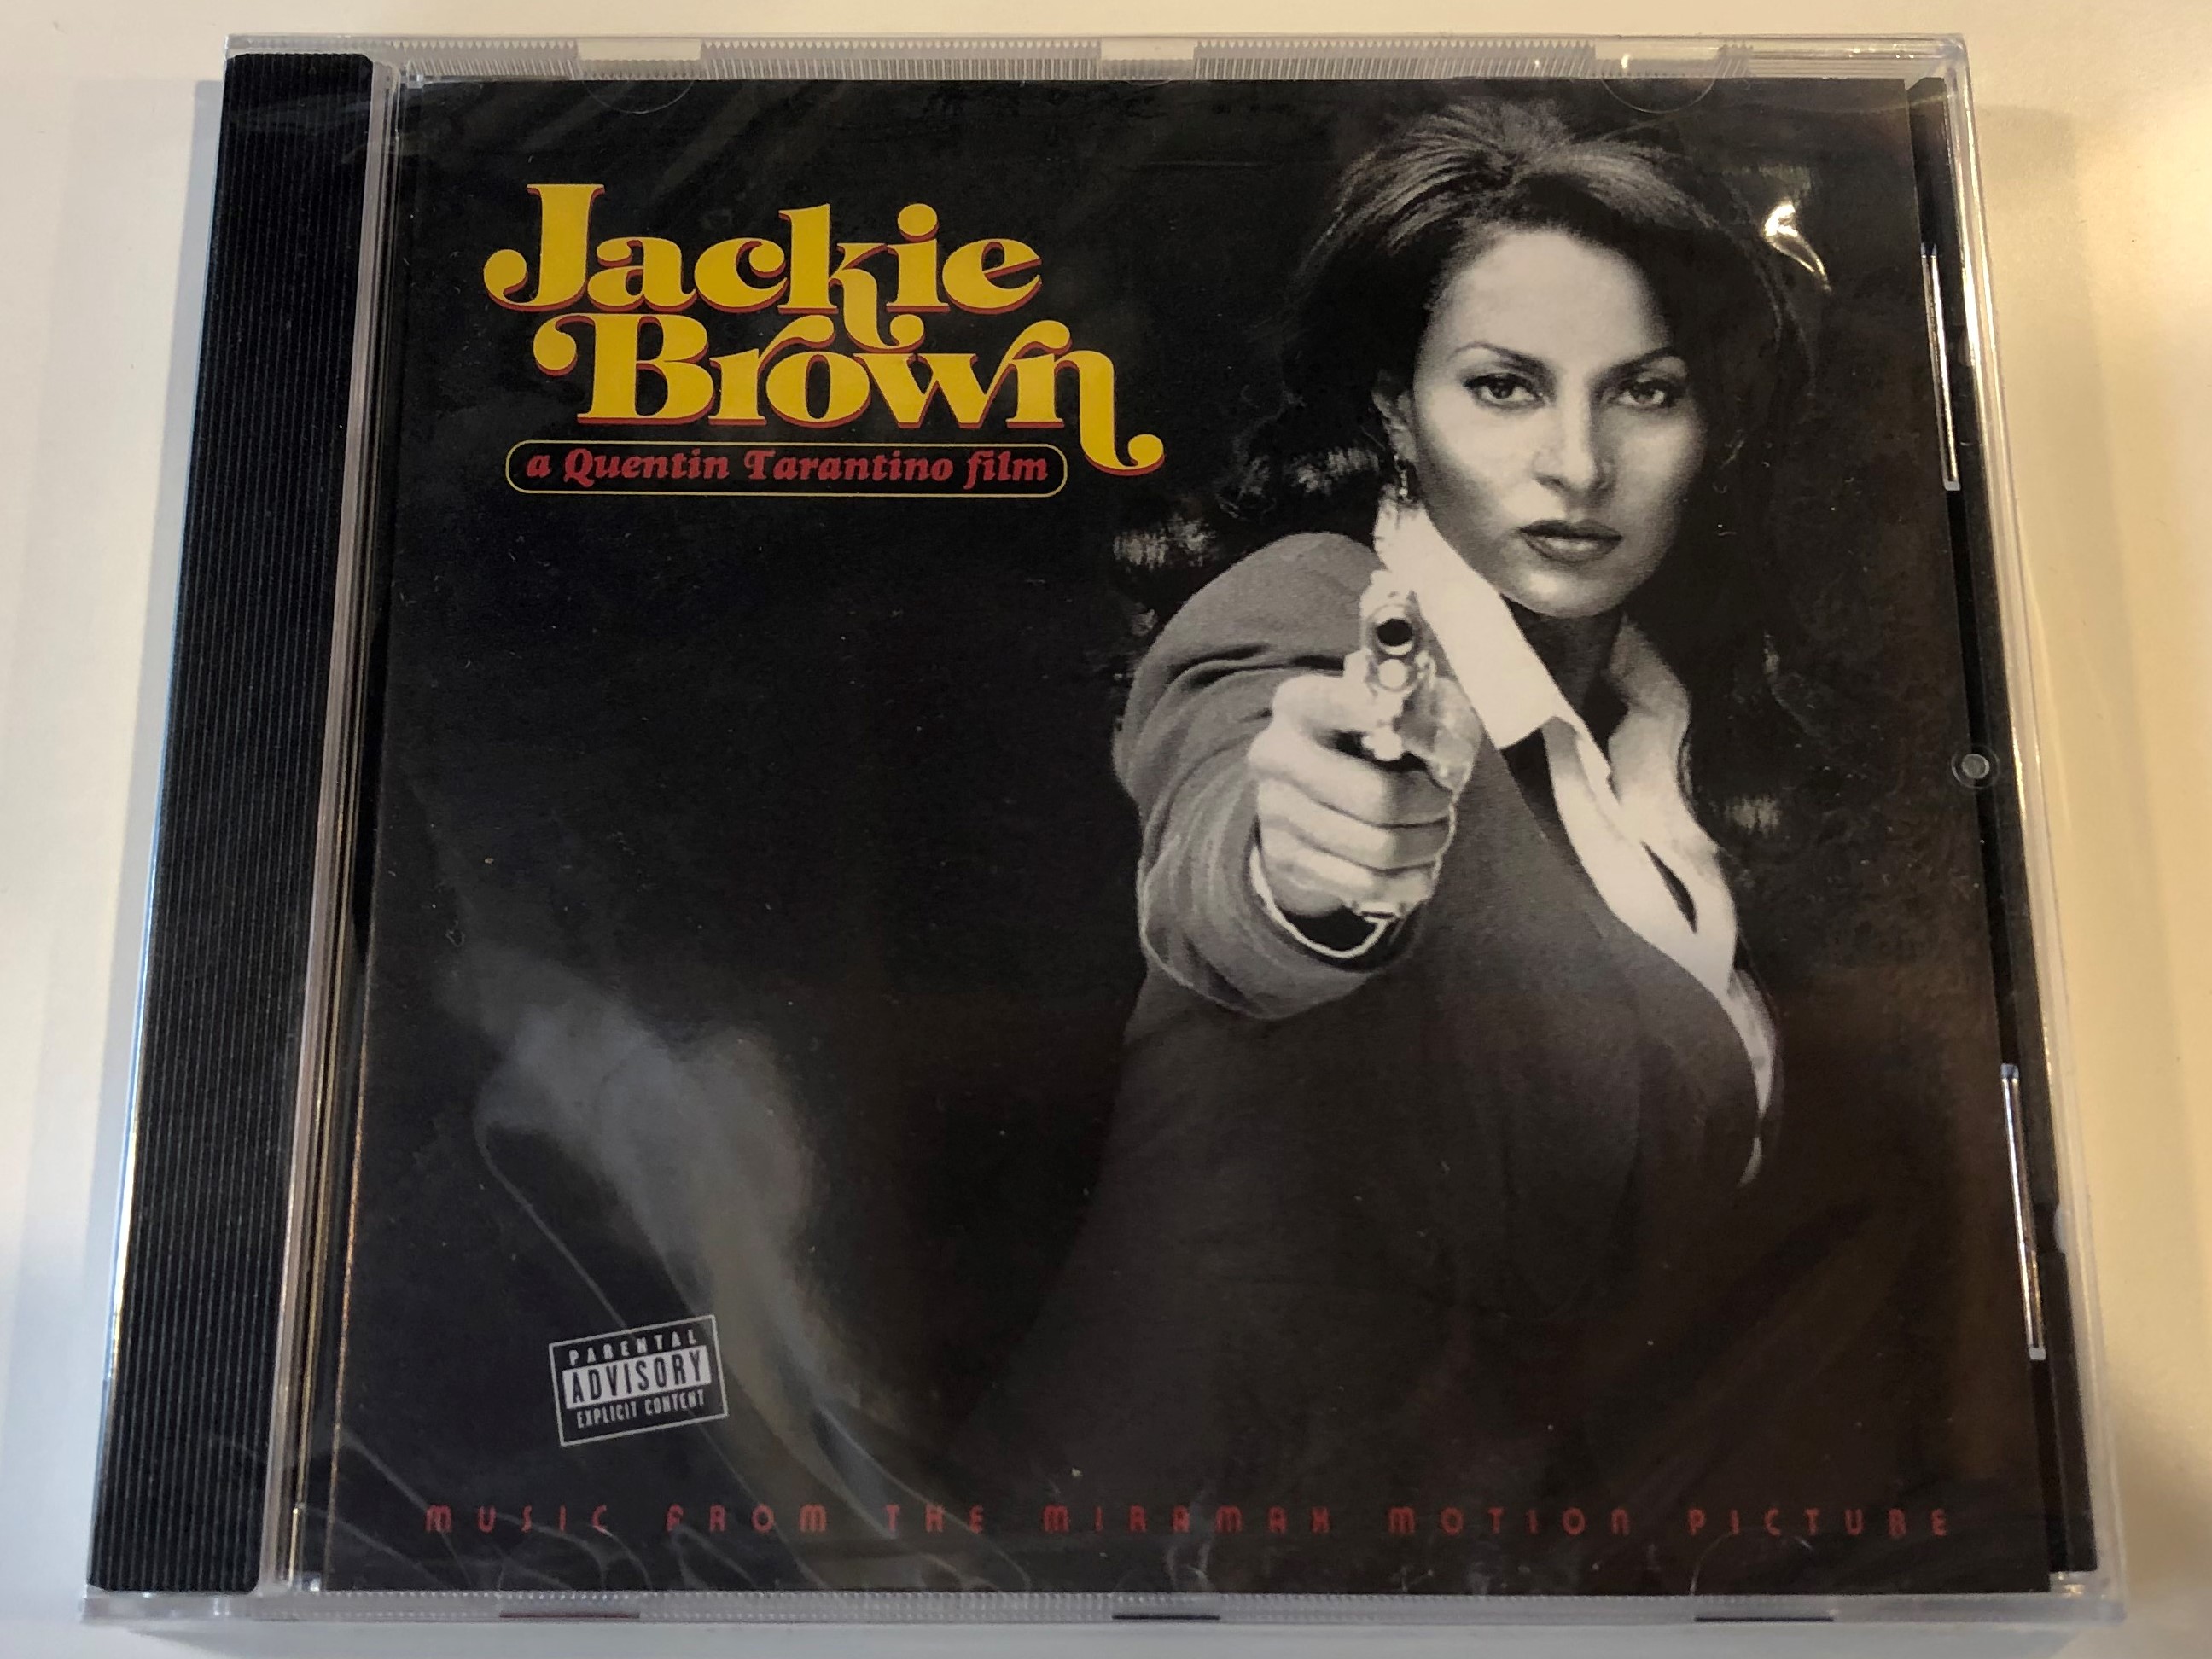 jackie-brown-a-quentin-tarantino-film-music-from-the-miramax-motion-picture-a-band-apart-audio-cd-1997-9362-46841-2-1-.jpg